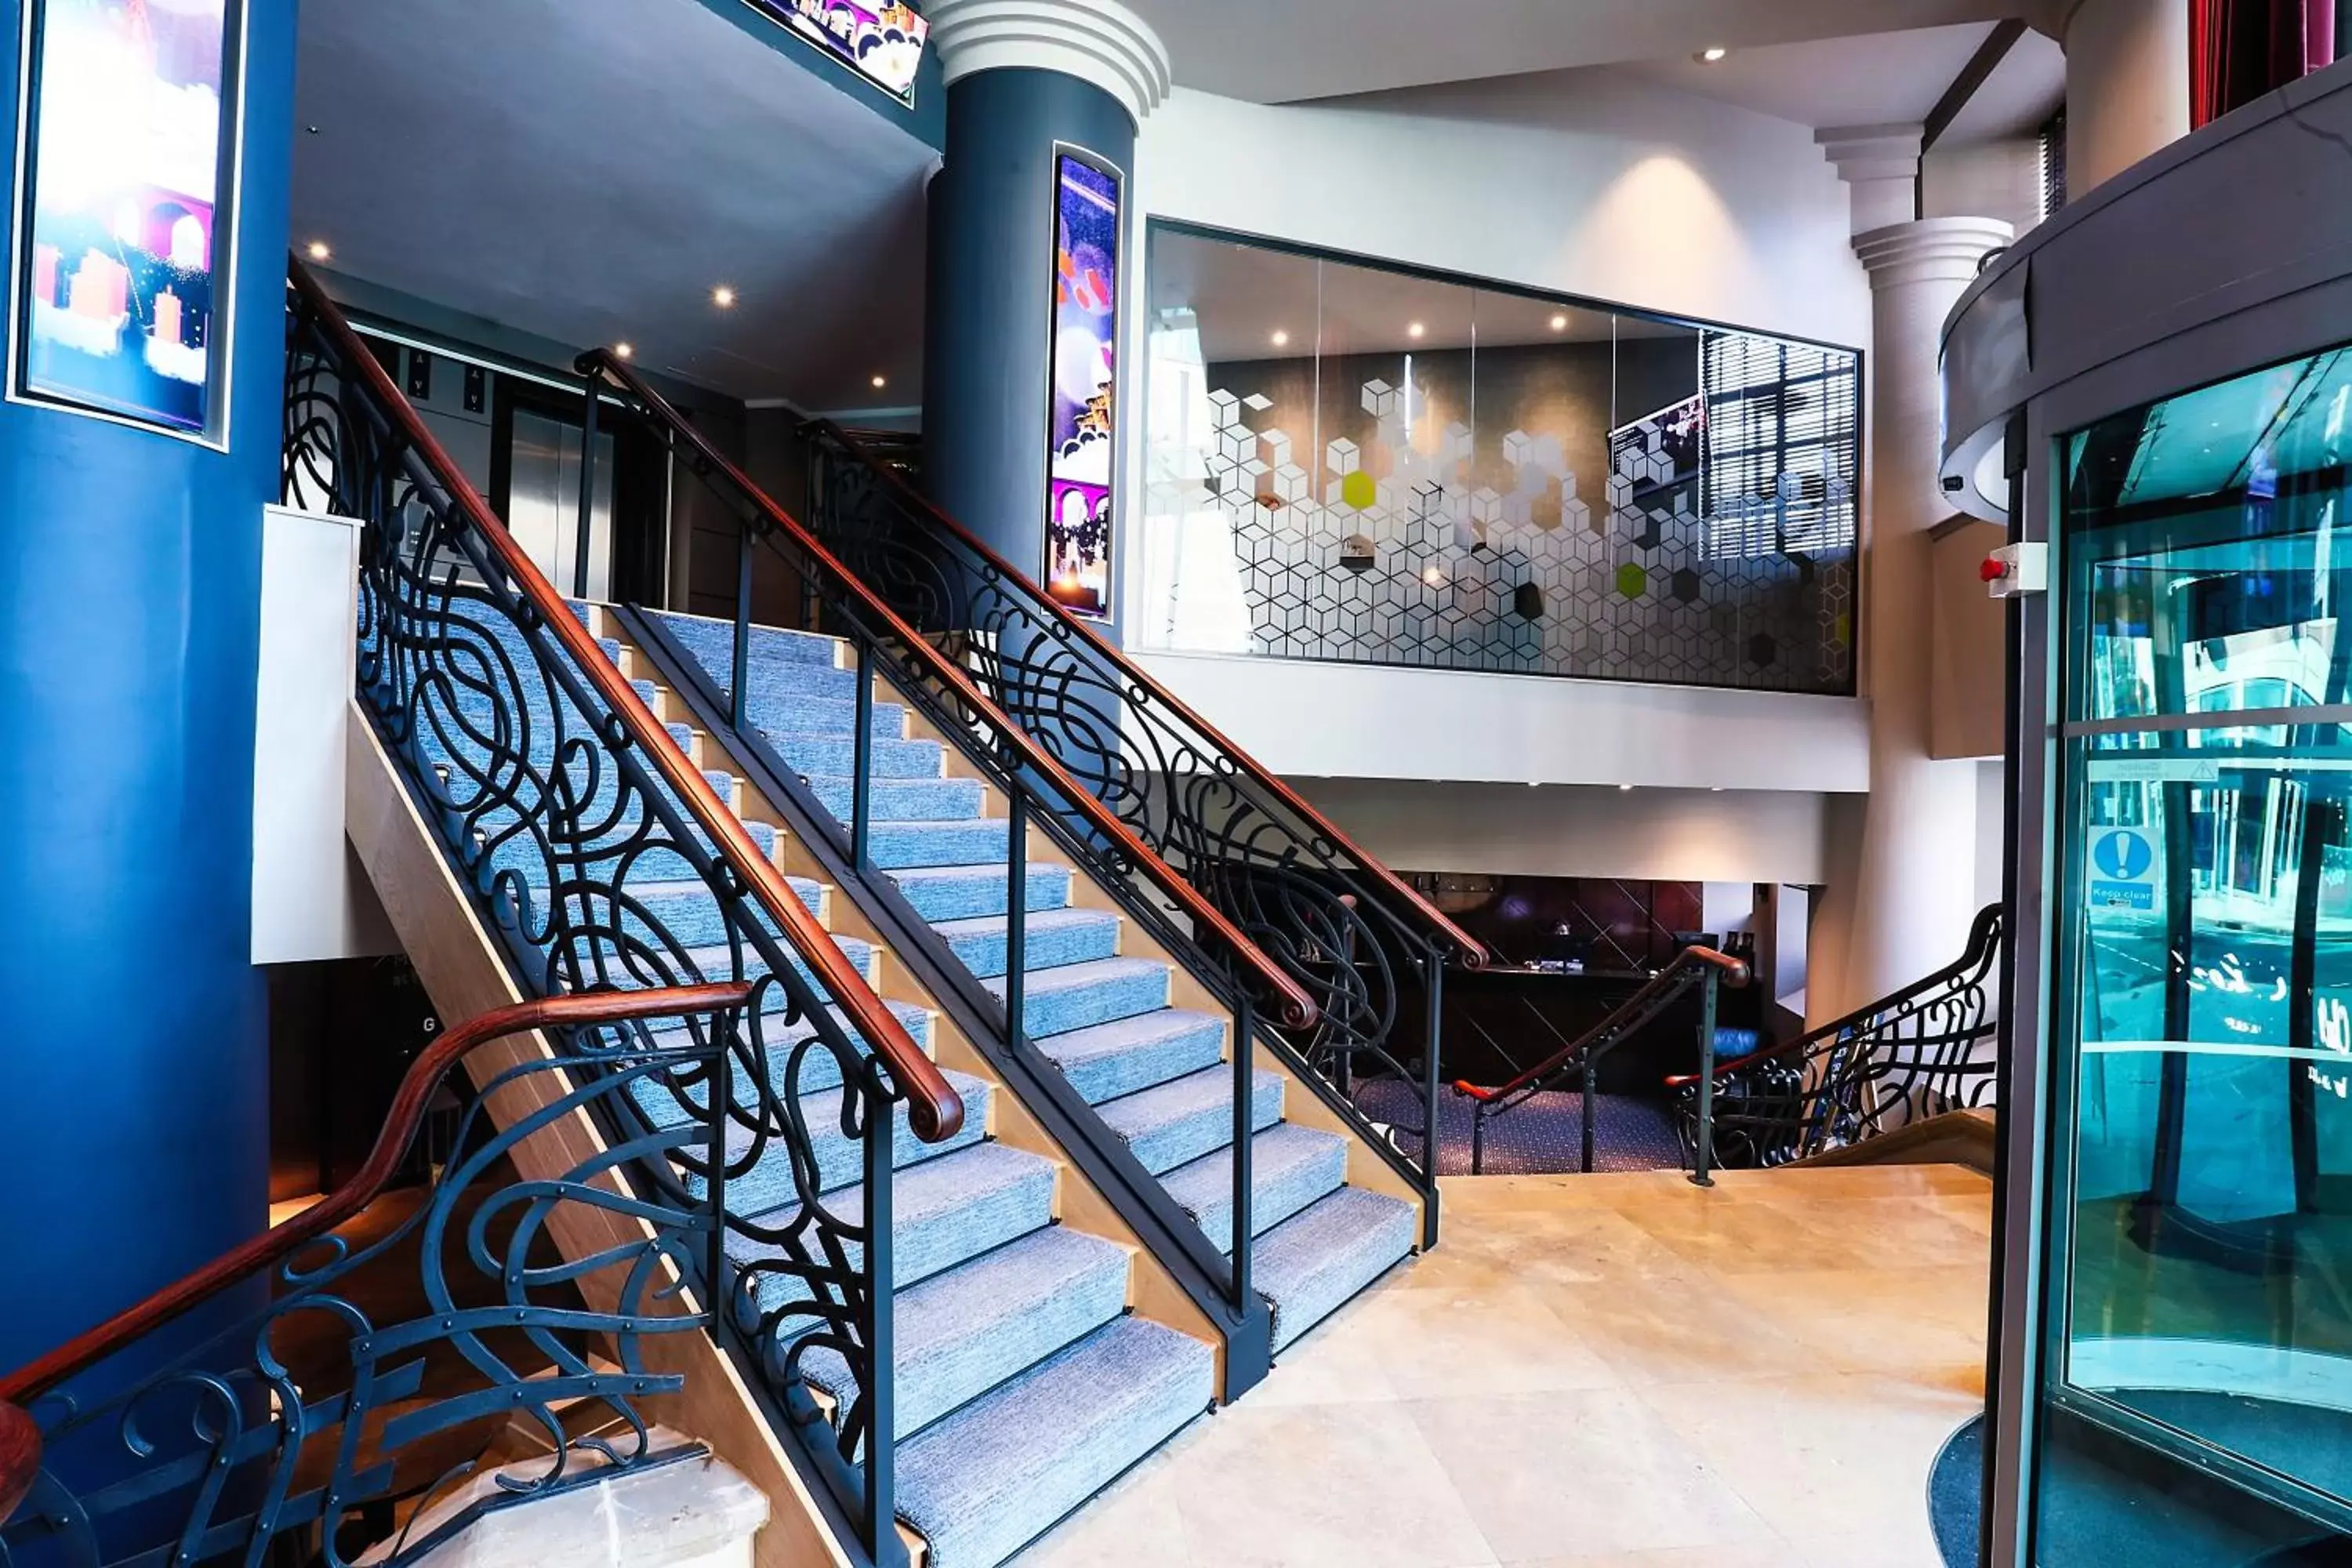 Property building in Malmaison Hotel Leeds